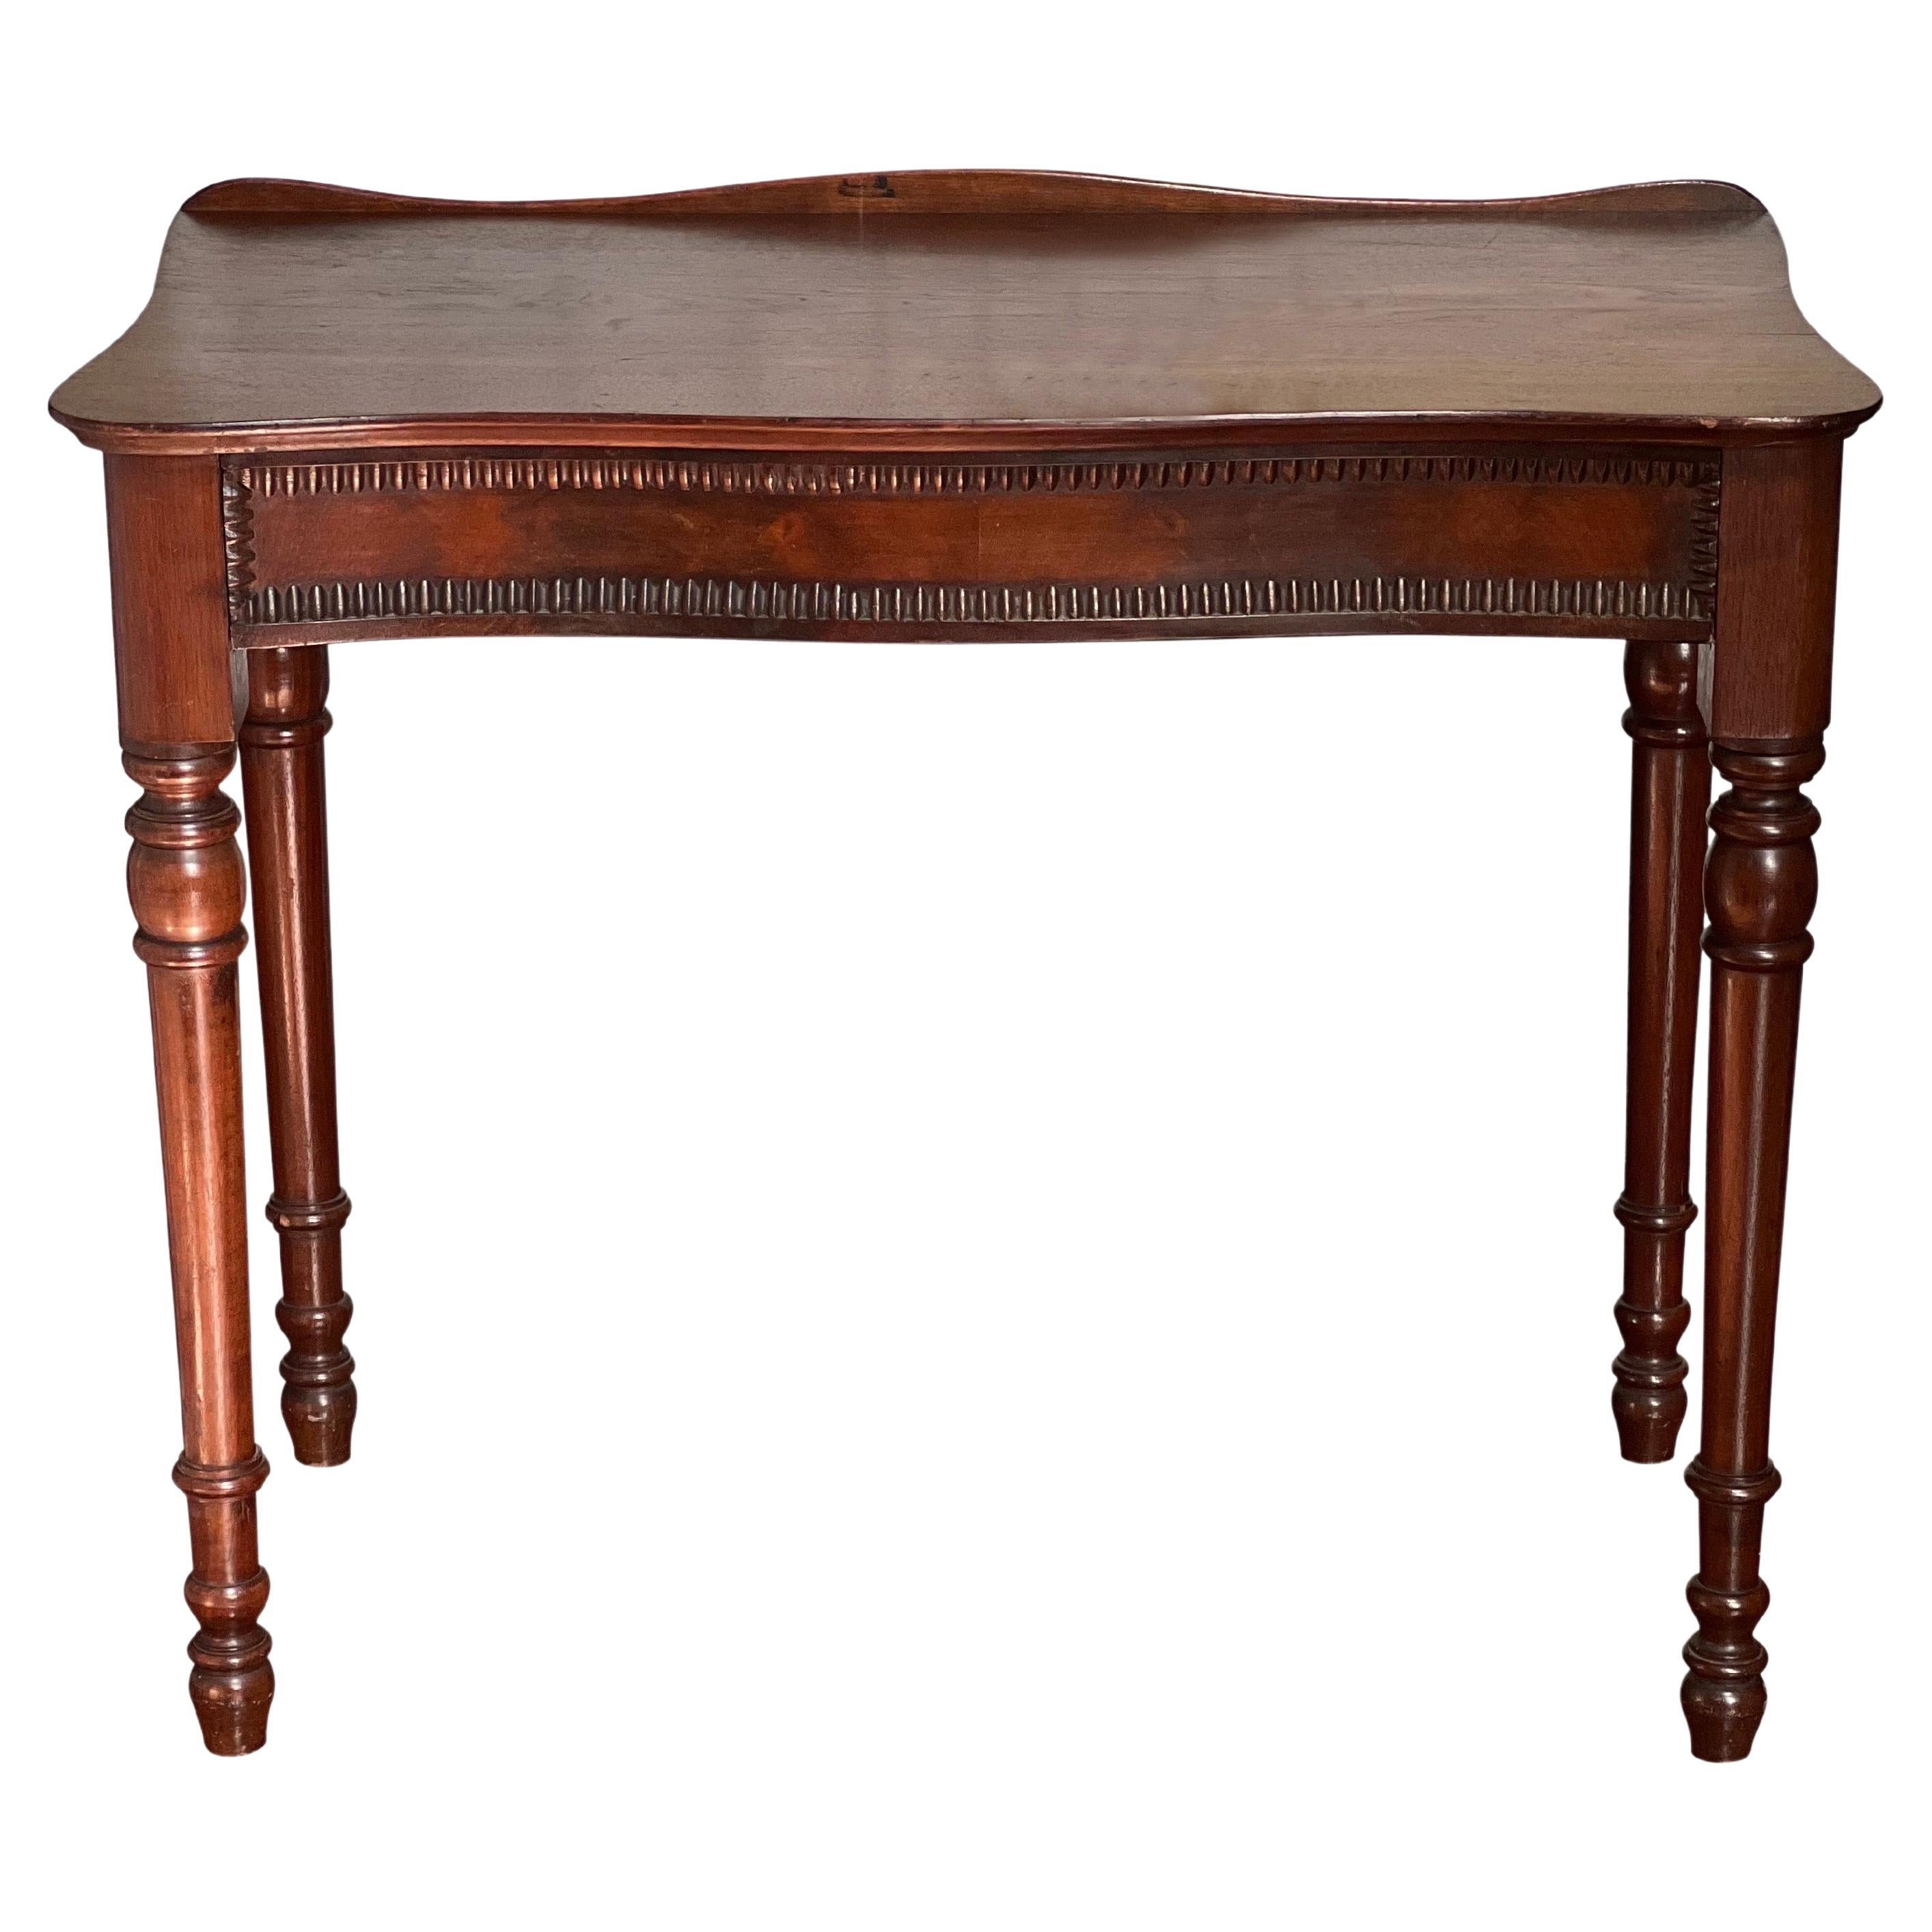 19th Century English Mahogany Serpentine Writing Desk with Single Drawer For Sale